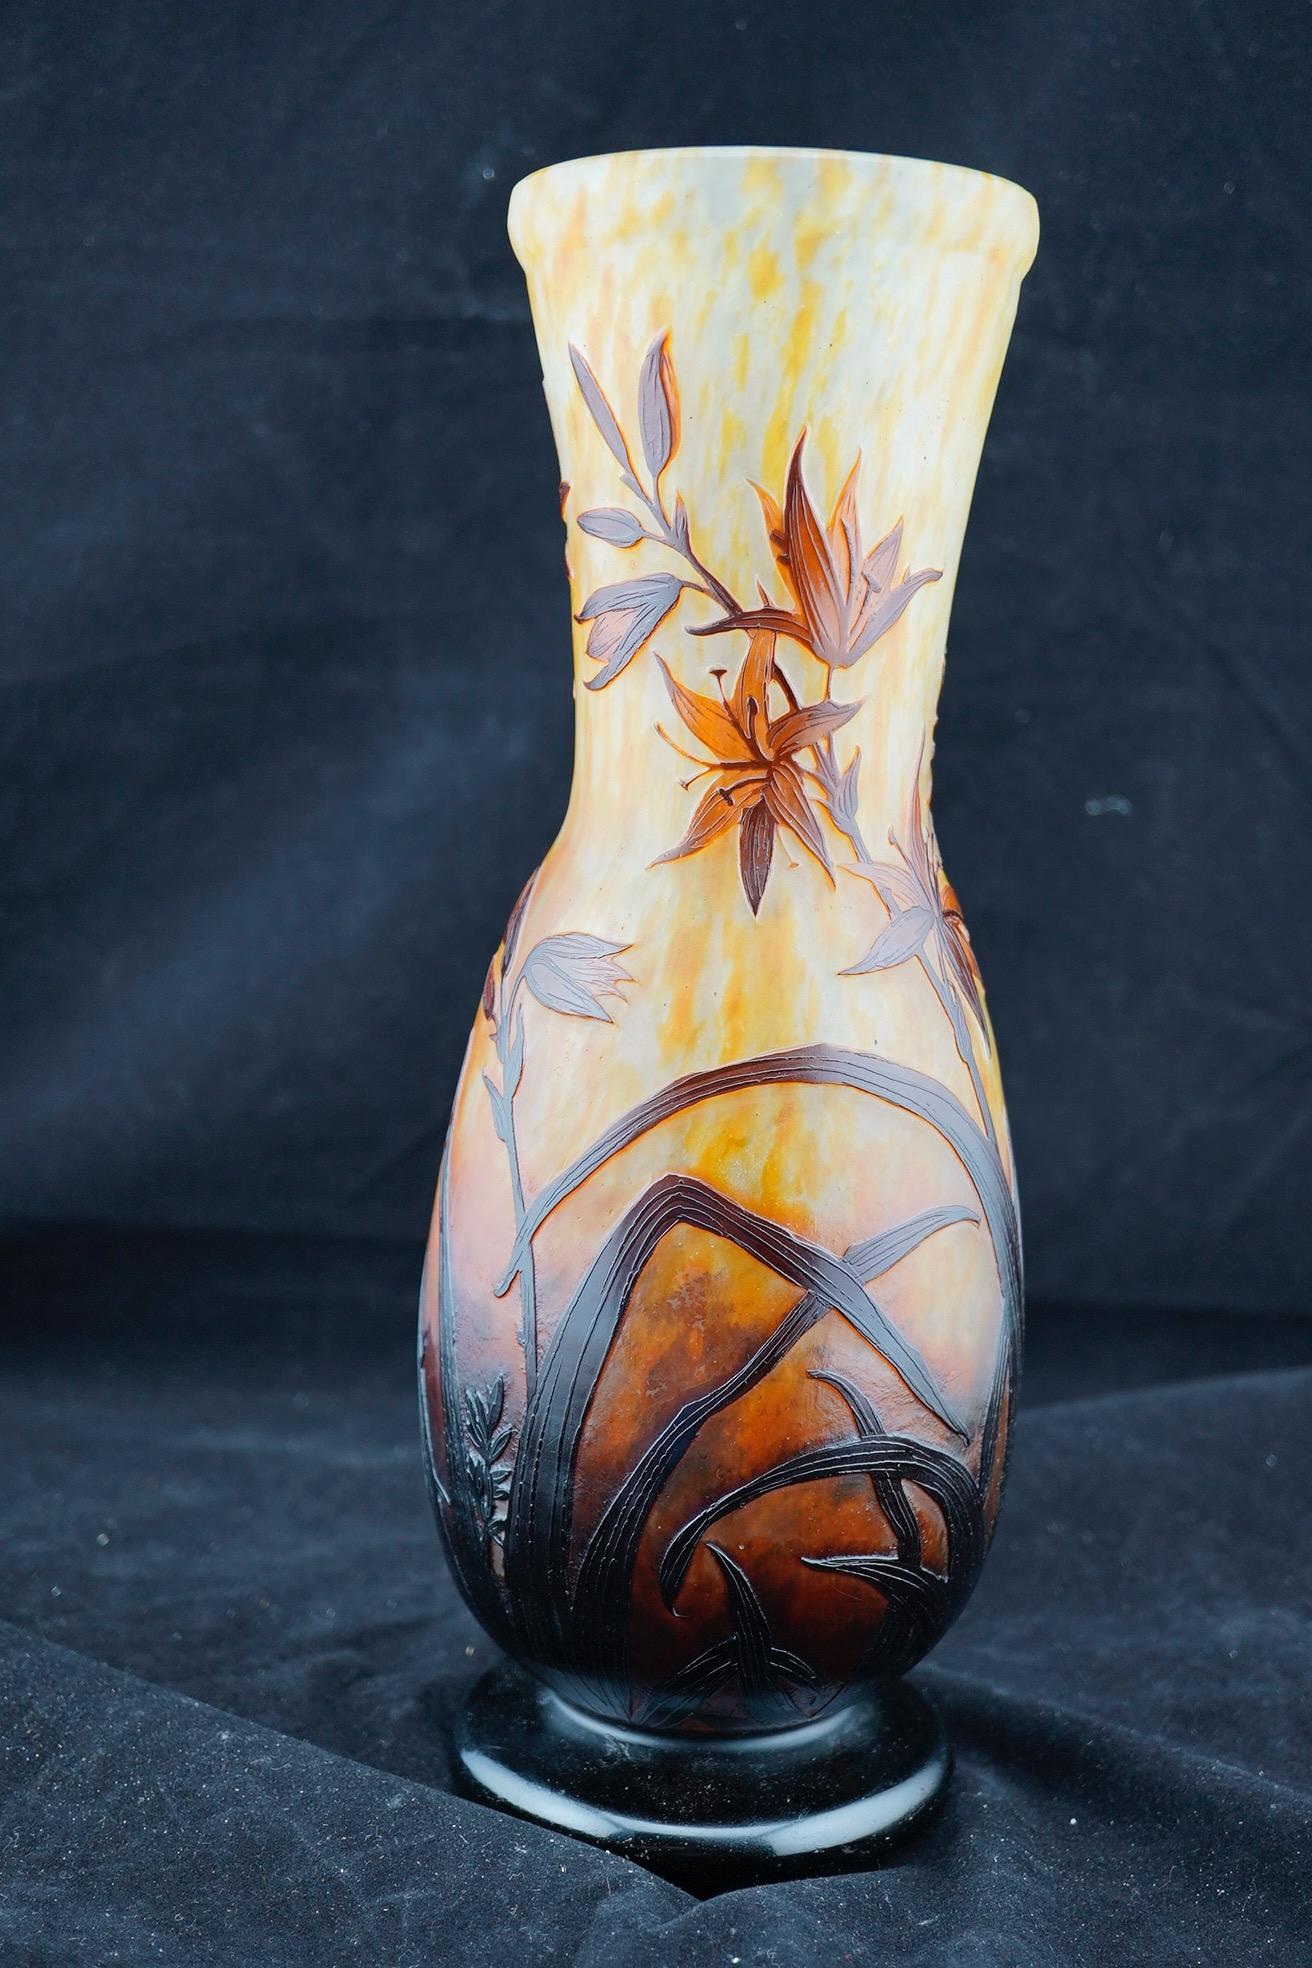 Daum cameo glass lily flower impressive vase. Very fine finish Signed in cameo. Good polished pontil.